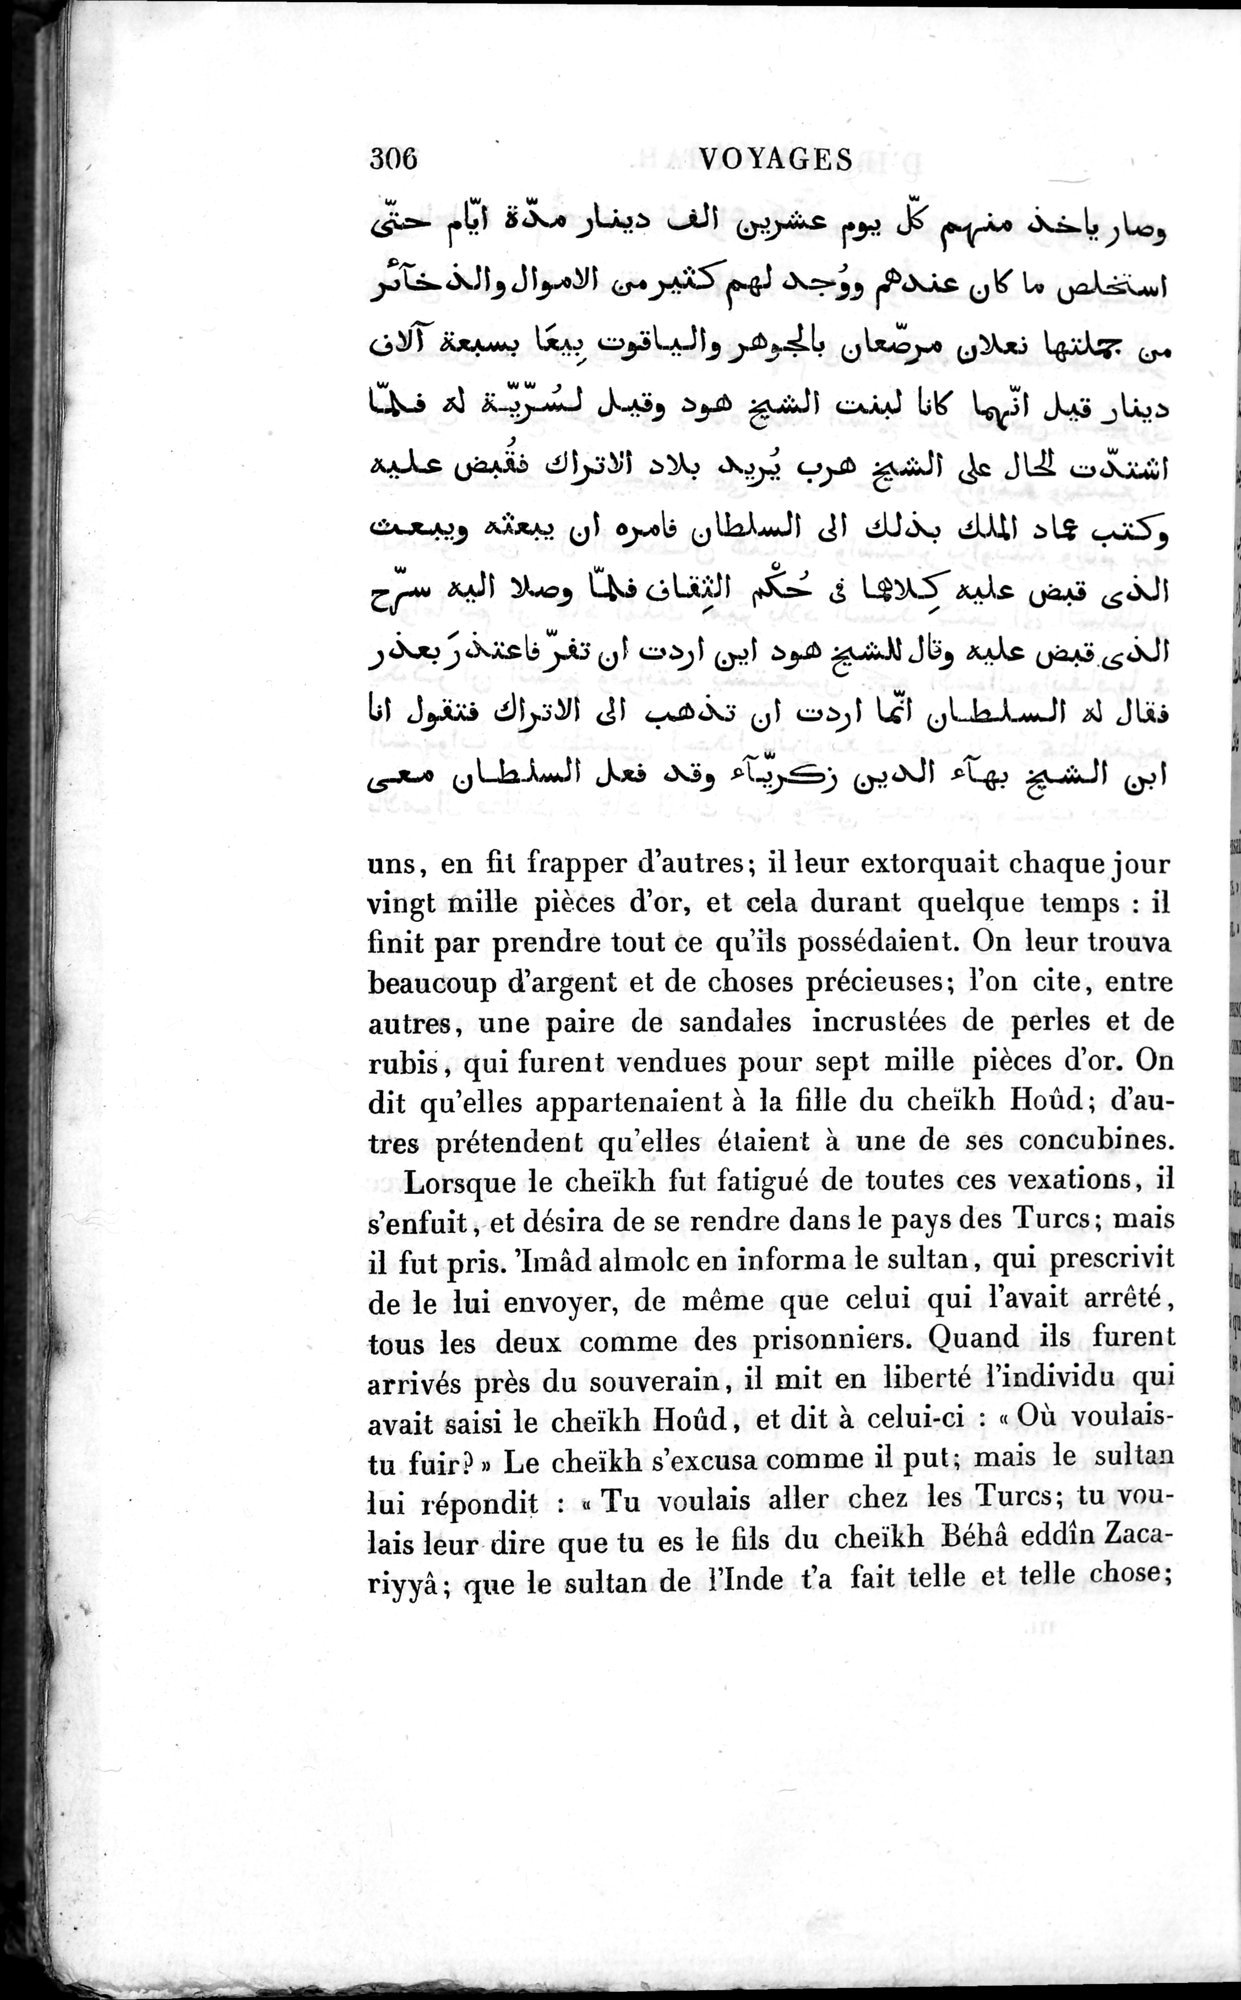 Voyages d'Ibn Batoutah : vol.3 / Page 346 (Grayscale High Resolution Image)